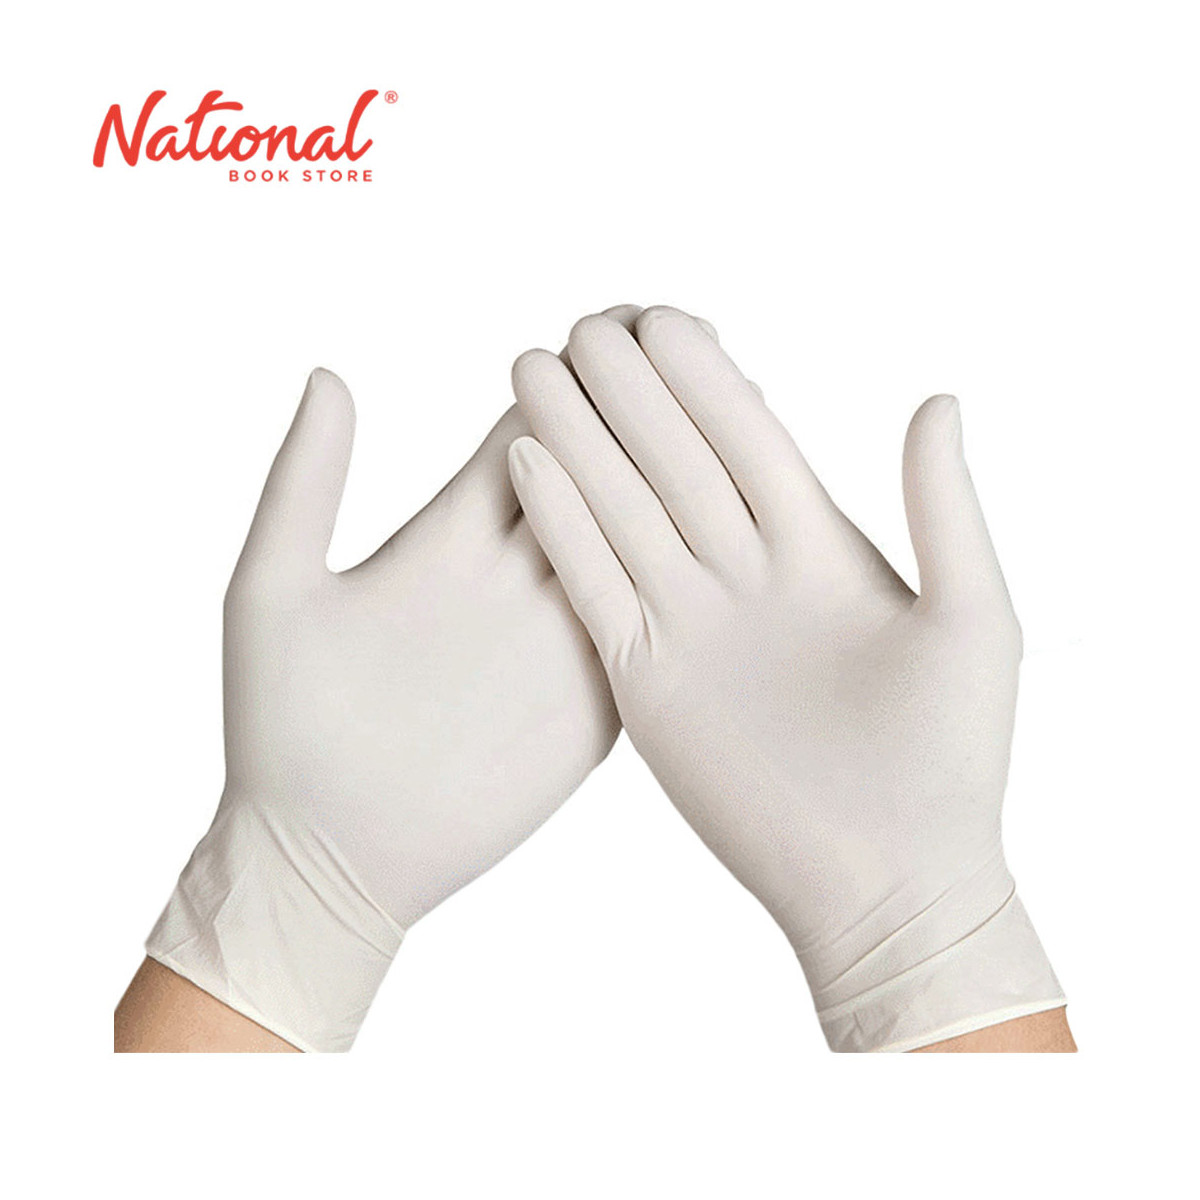 Great Glove Surgical Gloves Non-Sterile Powder Free 50 Pairs Small 100's - Medical Supplies